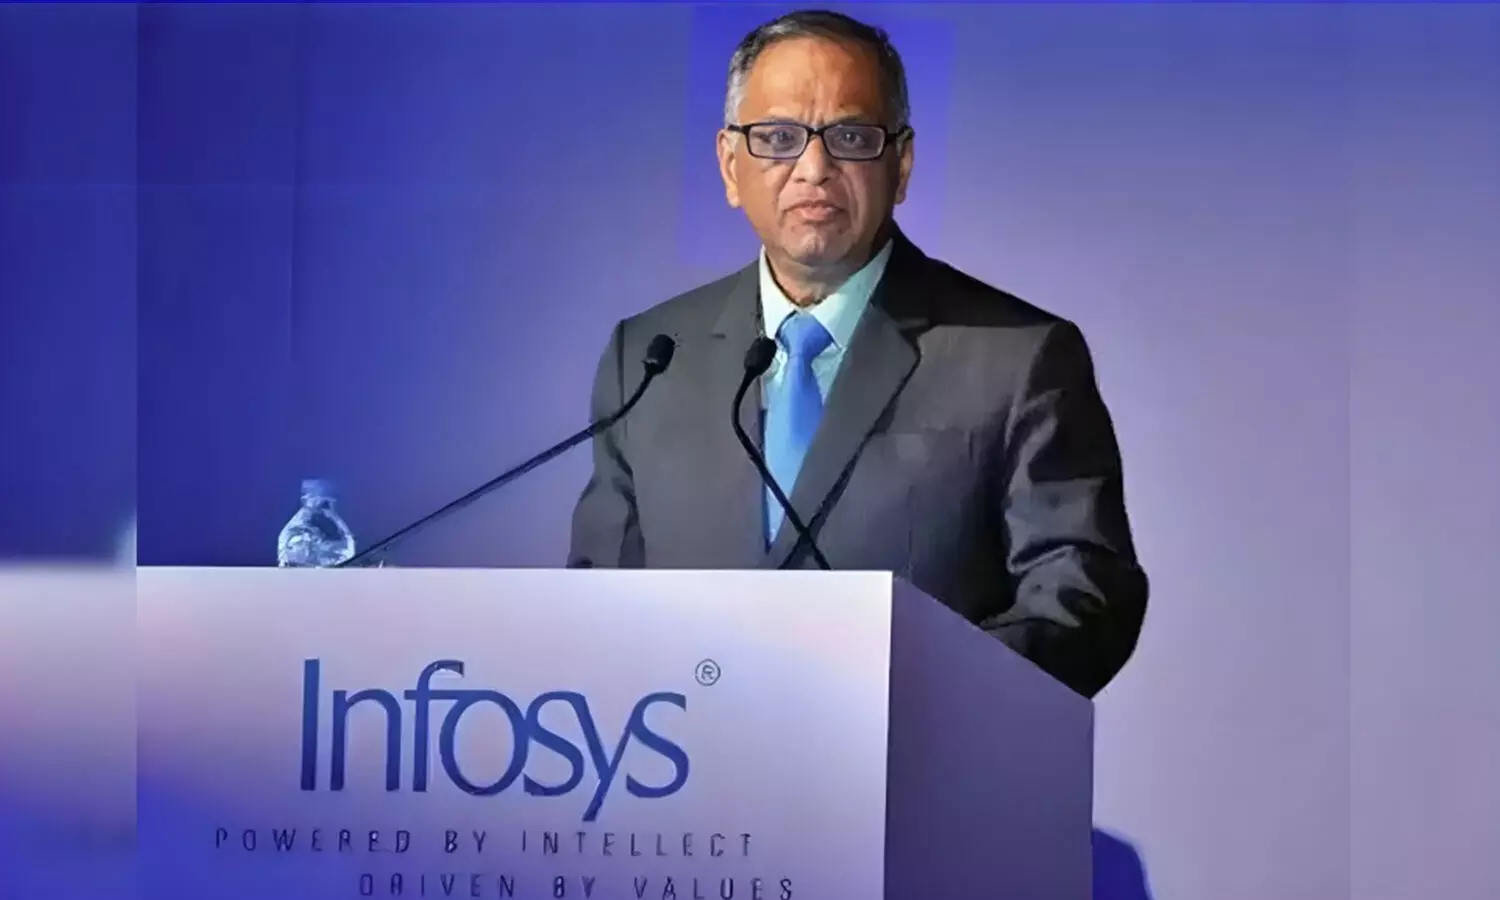 Gifting Infosys Shares- Tax Implications for Narayana Murthy and His Grandson